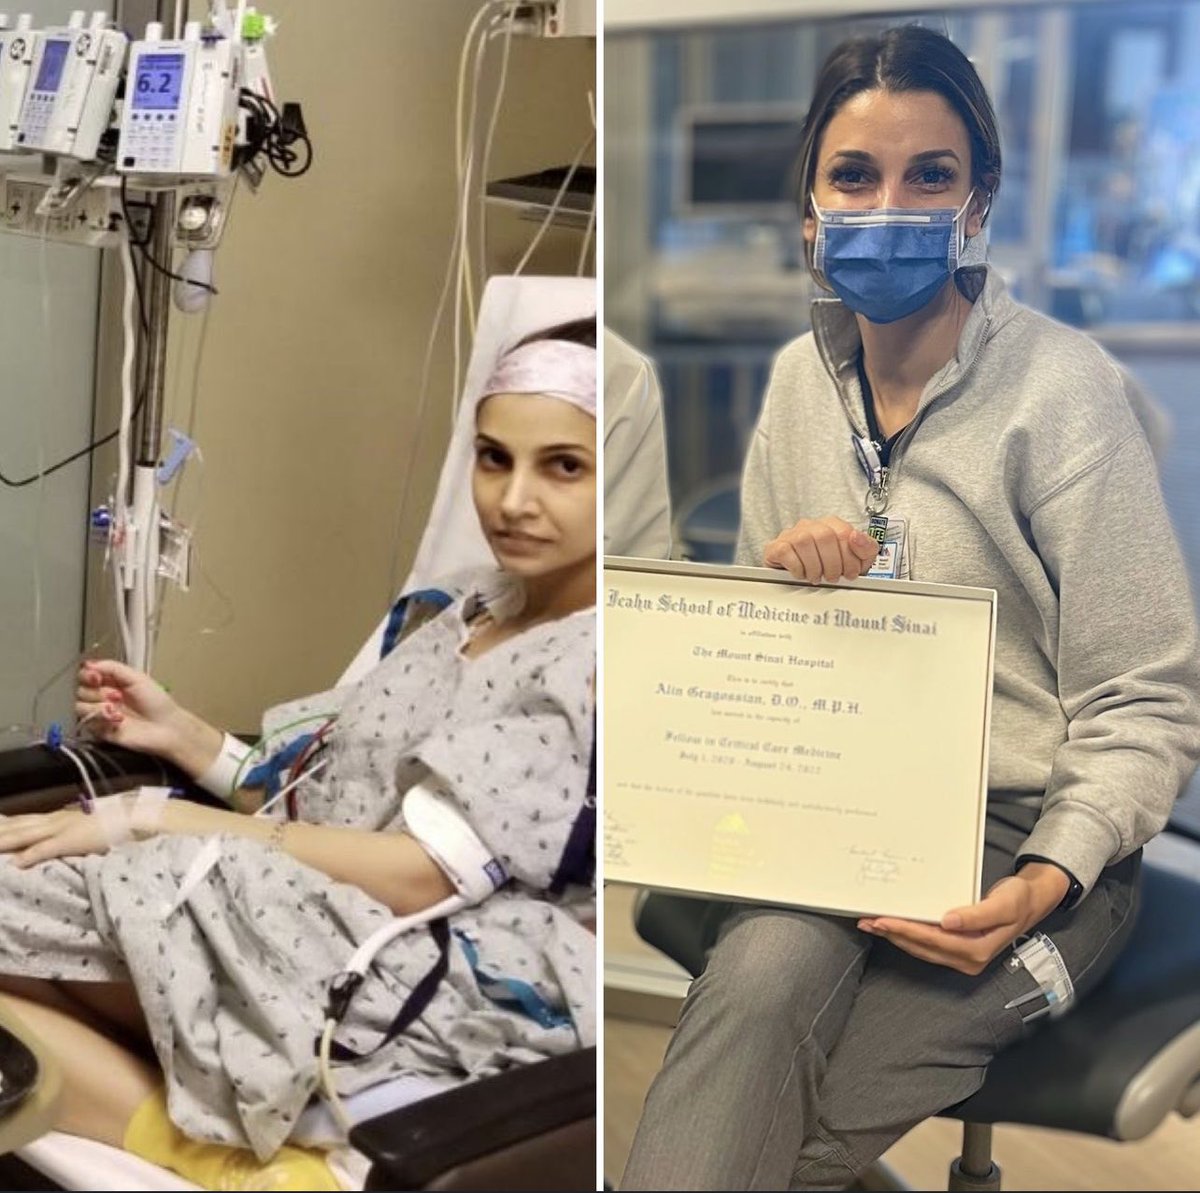 In 2019, I was a CVICU patient in cardiogenic shock due to fam cardiomyopathy. Had to get a heart transplant!

This week, I’m a doctor in a CVICU. Got my Crit Care Medicine #fellowship diploma, & have a few shifts left. 🥹

Huge thank you to my #organdonor for this. #donatelife